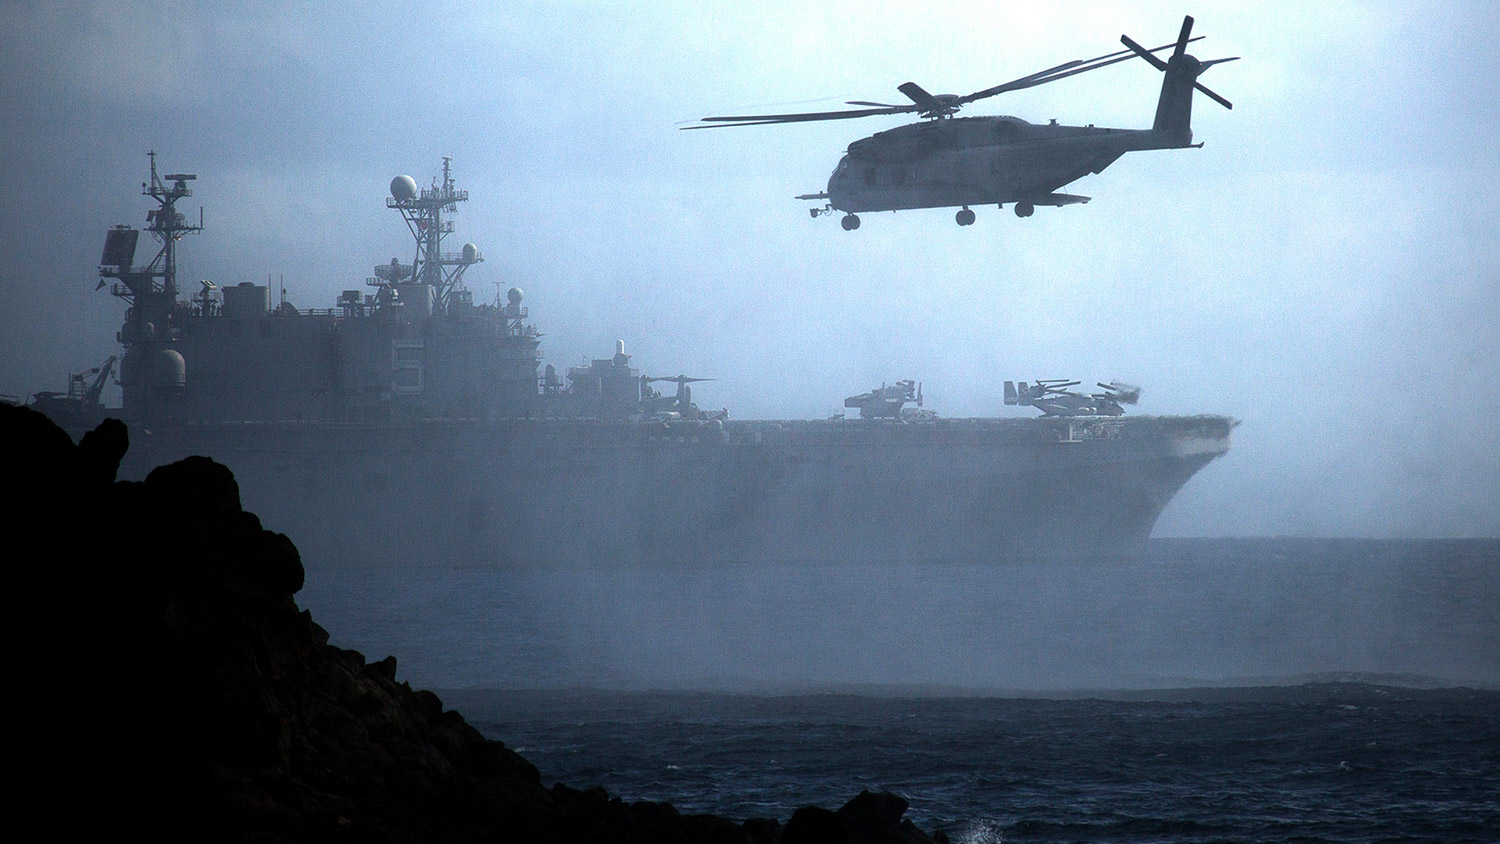 A CH-53E Super Stallion helicopter flies ahead of the amphibious assault ship USS Peleliu (LHA-5) after conducting helocast operations at Pyramid Rock Beach, Marine Corps Base Hawaii.